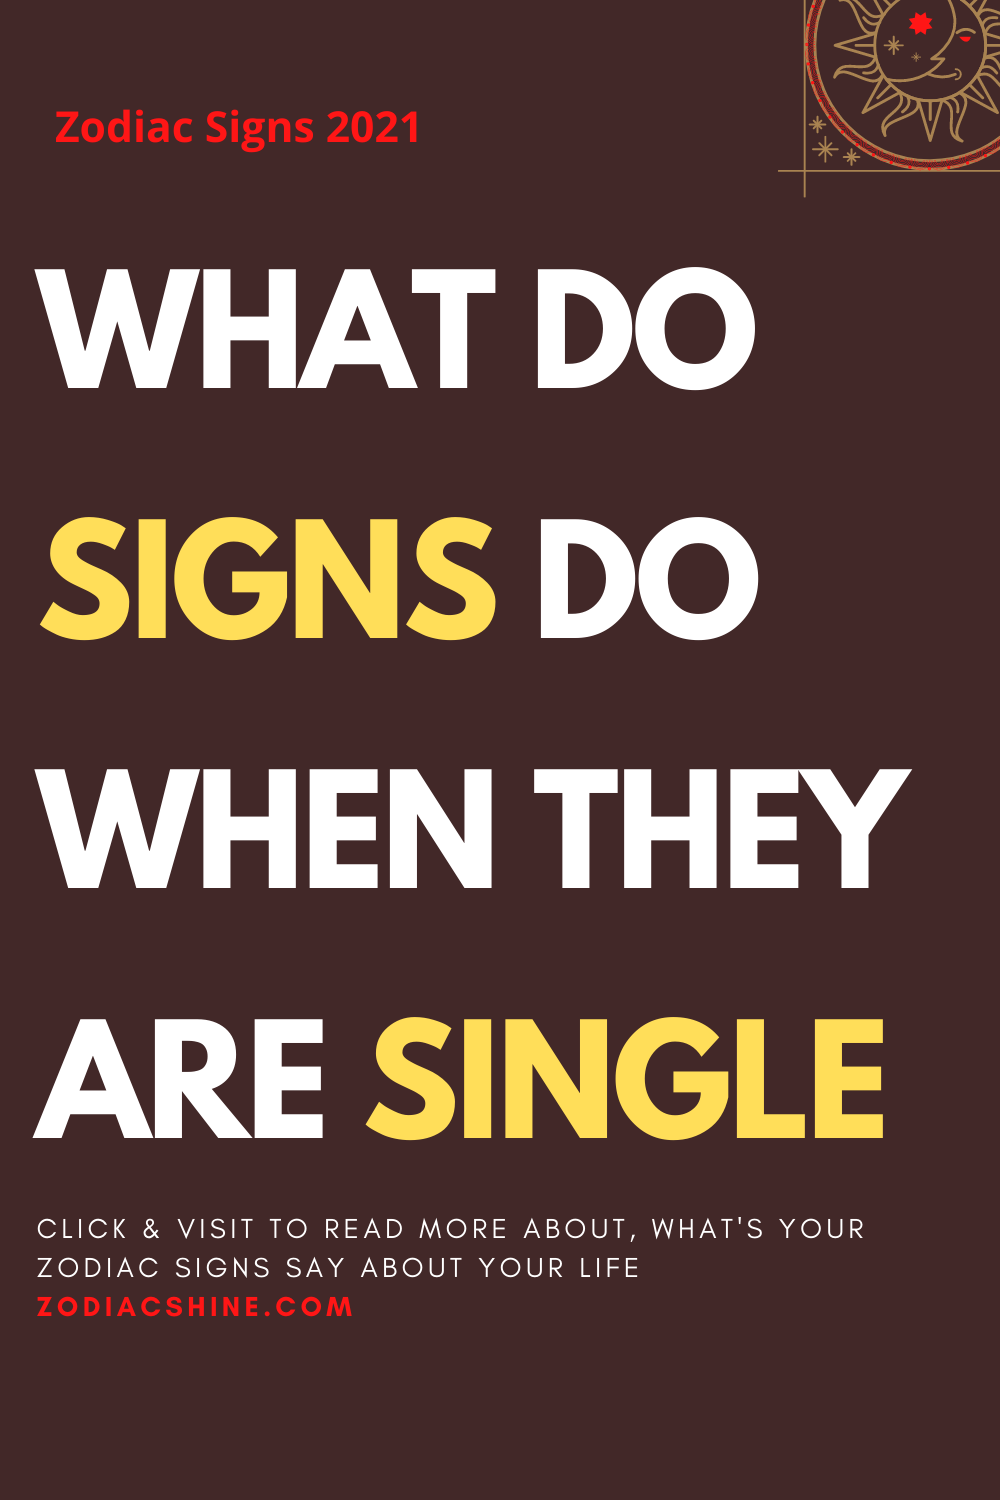 WHAT DO SIGNS DO WHEN THEY ARE SINGLE